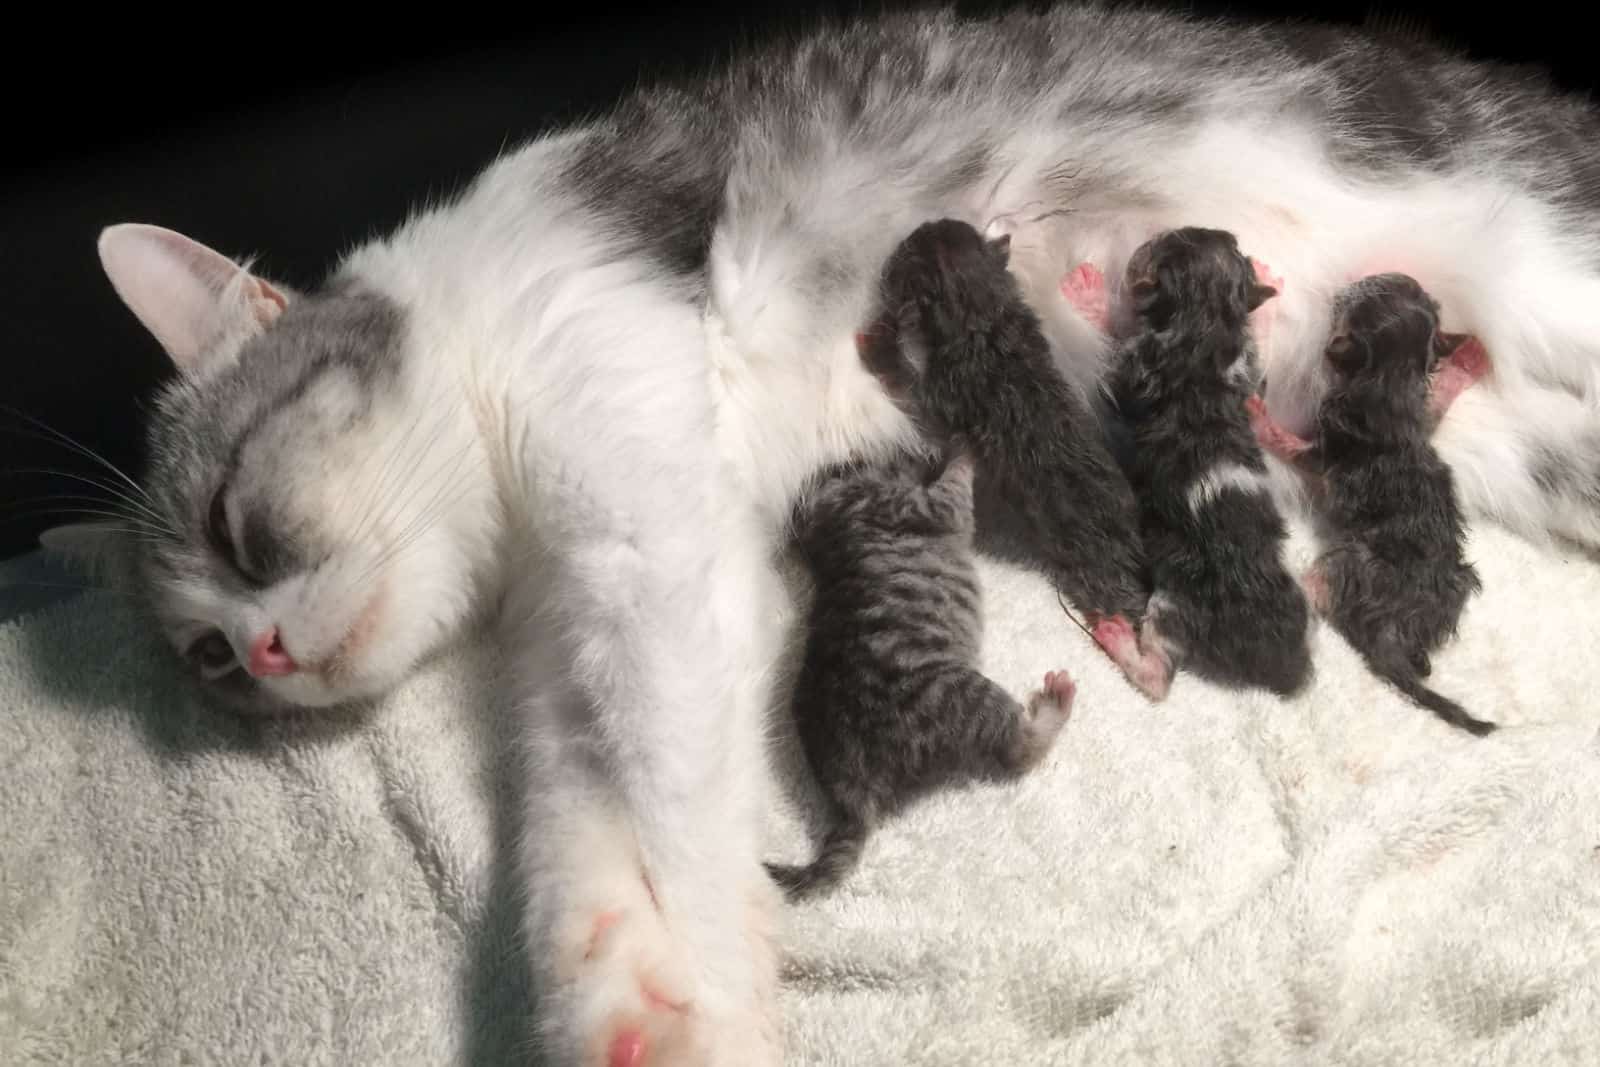 Mother fluffy cat pregnant give birth and new born baby kittens drinking milk from their mom breast.